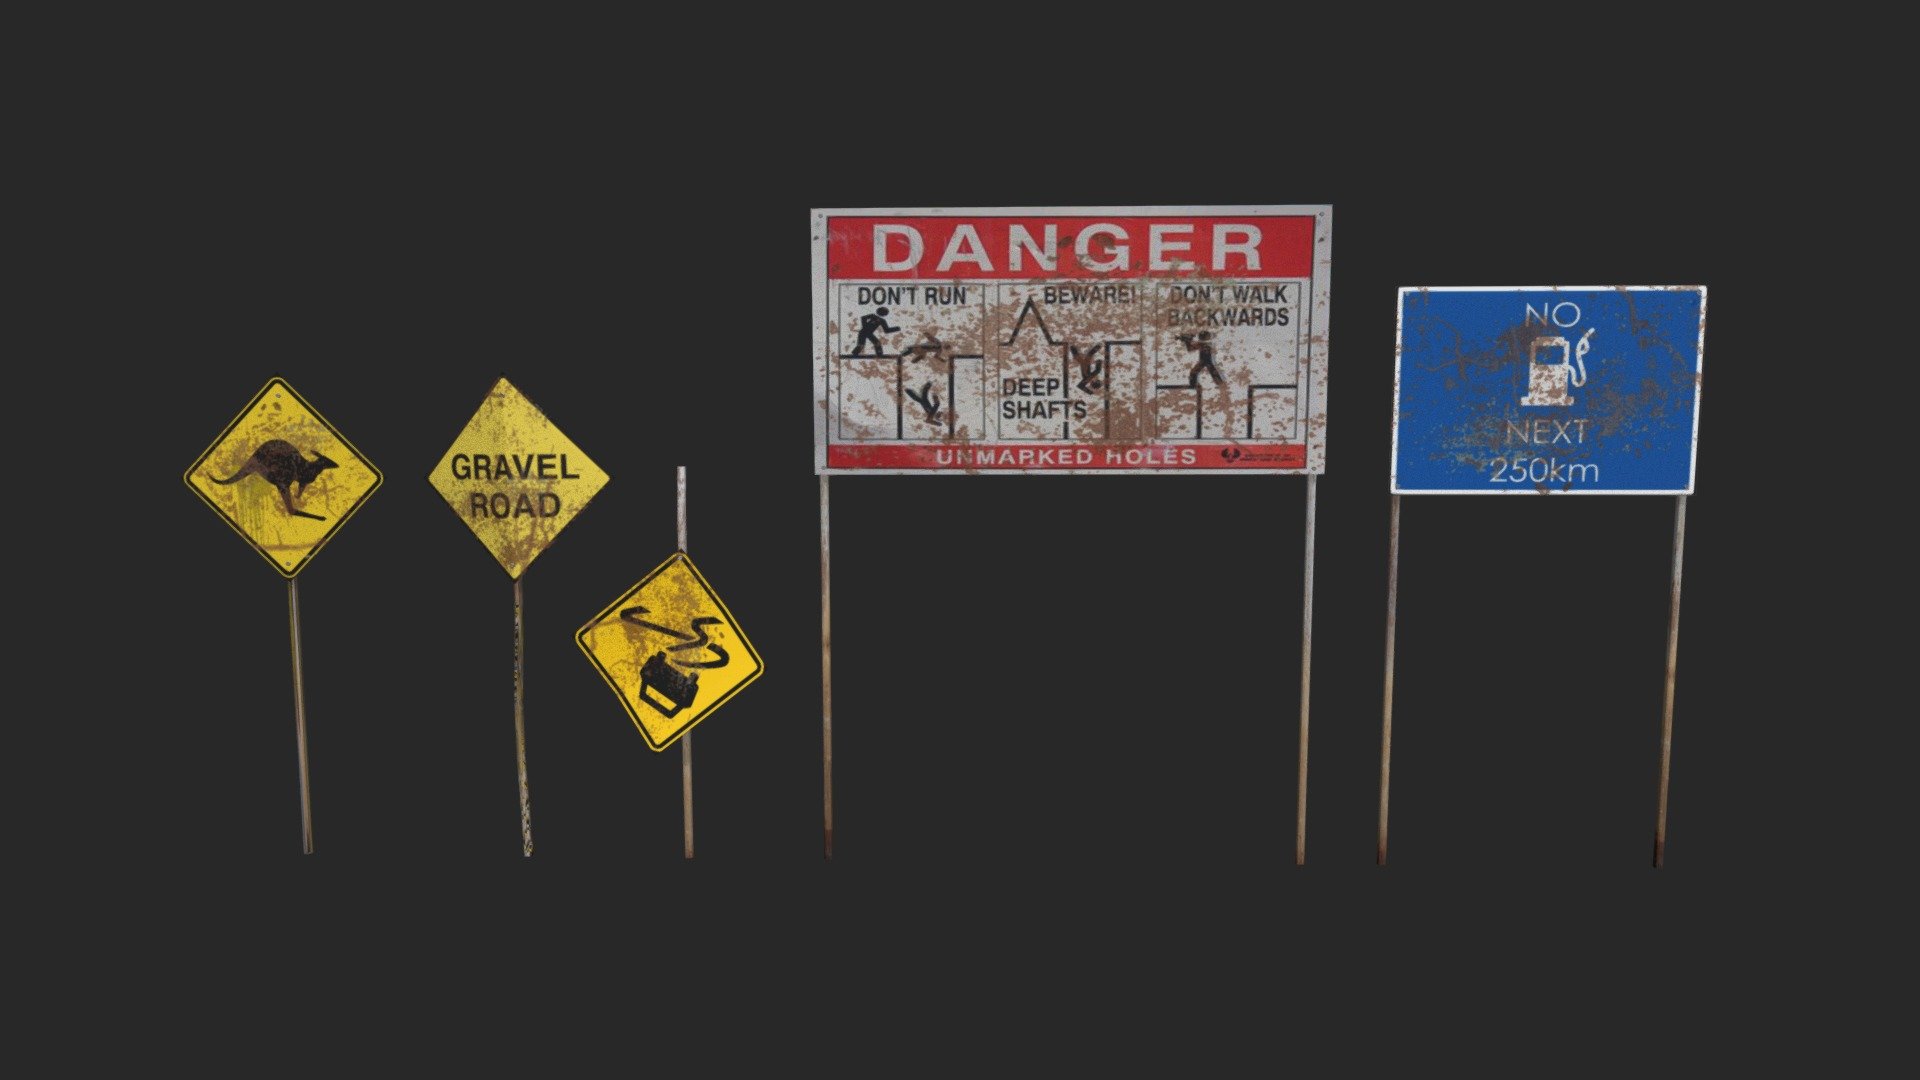 These models are part of my Gas Station project. It contains different outback signs that will be placed around my environment scene. The models where created in Maya and the scene was created in UE4 for a game environment 3d model